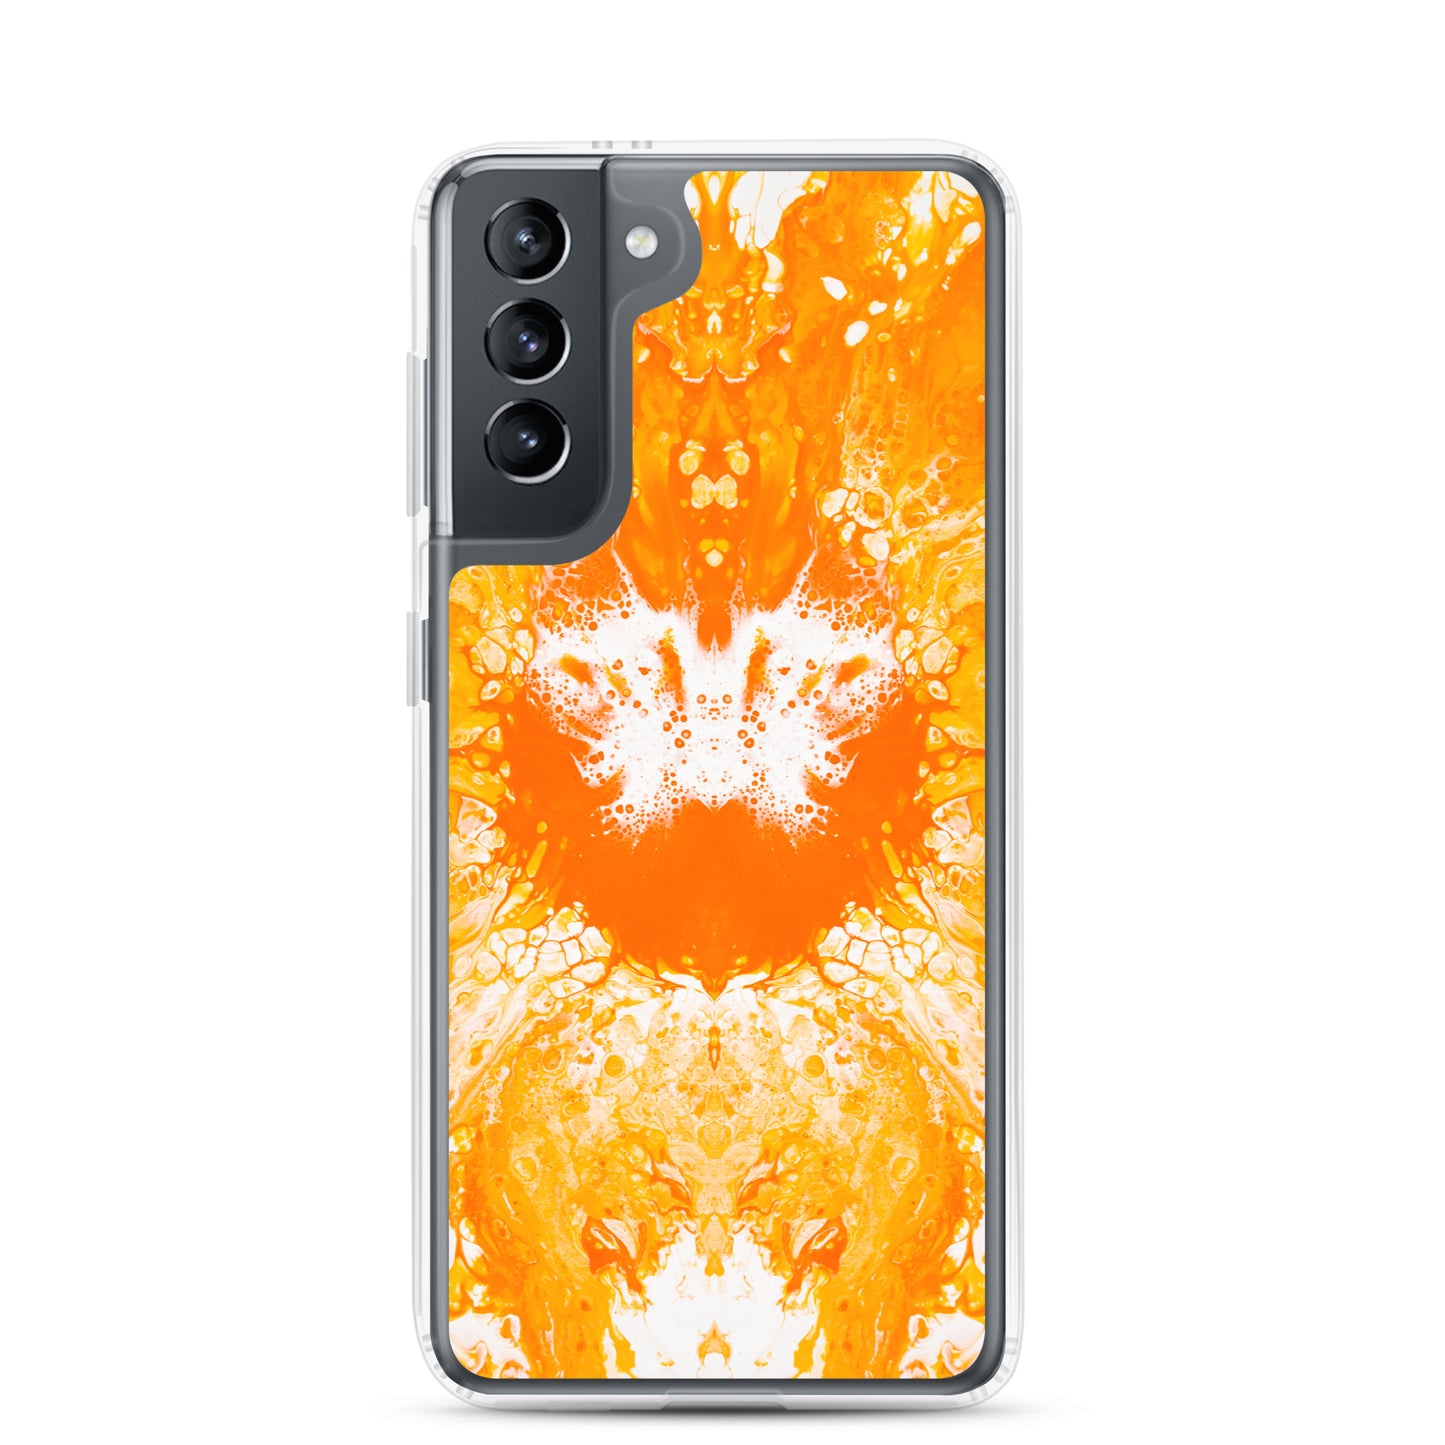 NightOwl Studio Custom Phone Case Compatible with Samsung Galaxy, Slim Cover for Wireless Charging, Drop and Scratch Resistant, Naranja